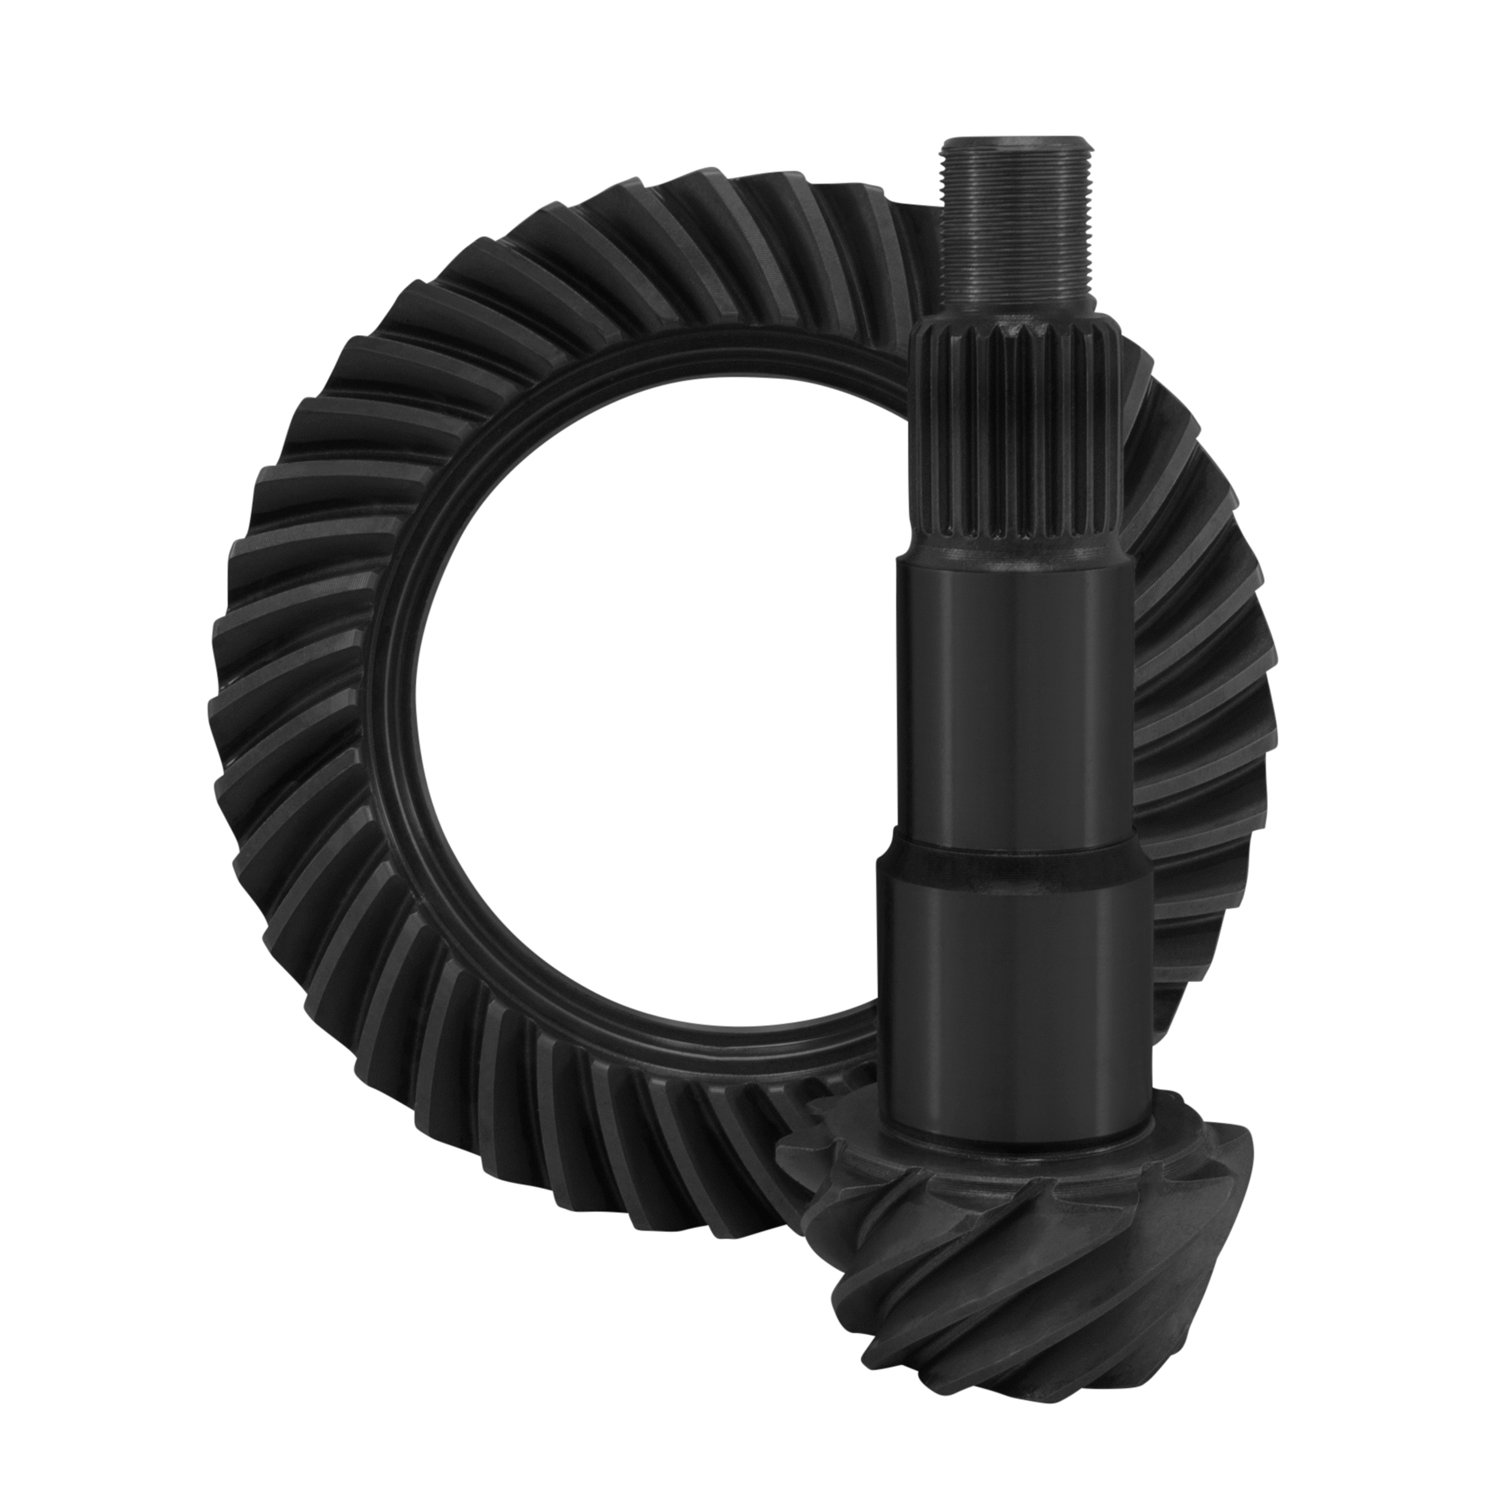 Gear High Perfomance Dana 30 Ring & Pinions For Reverse Front 5.13 Ratio